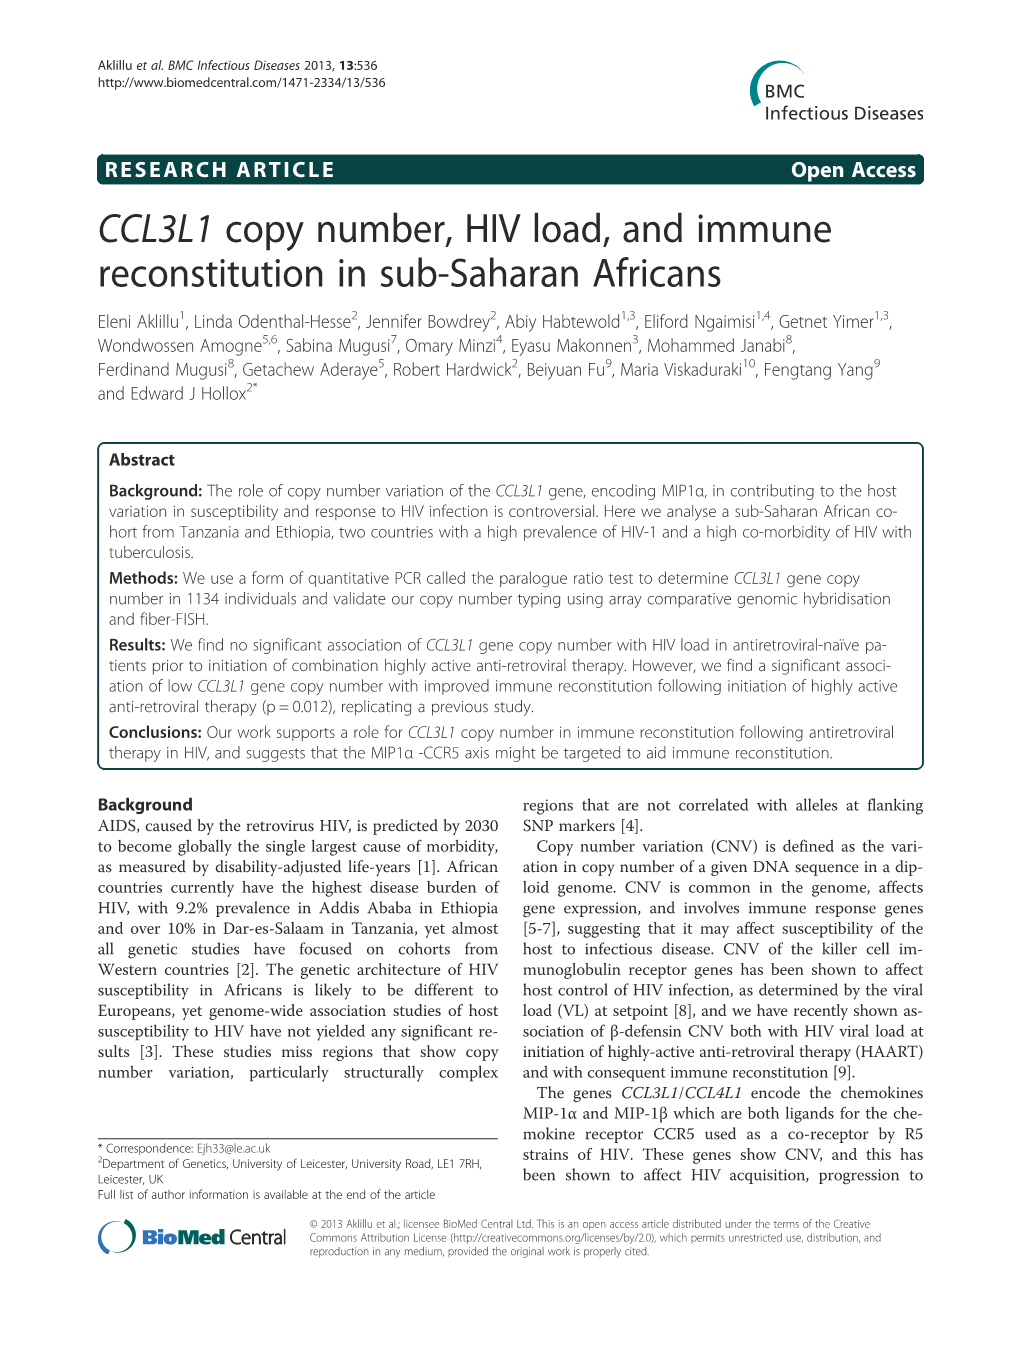 CCL3L1 Copy Number, HIV Load, and Immune Reconstitution in Sub